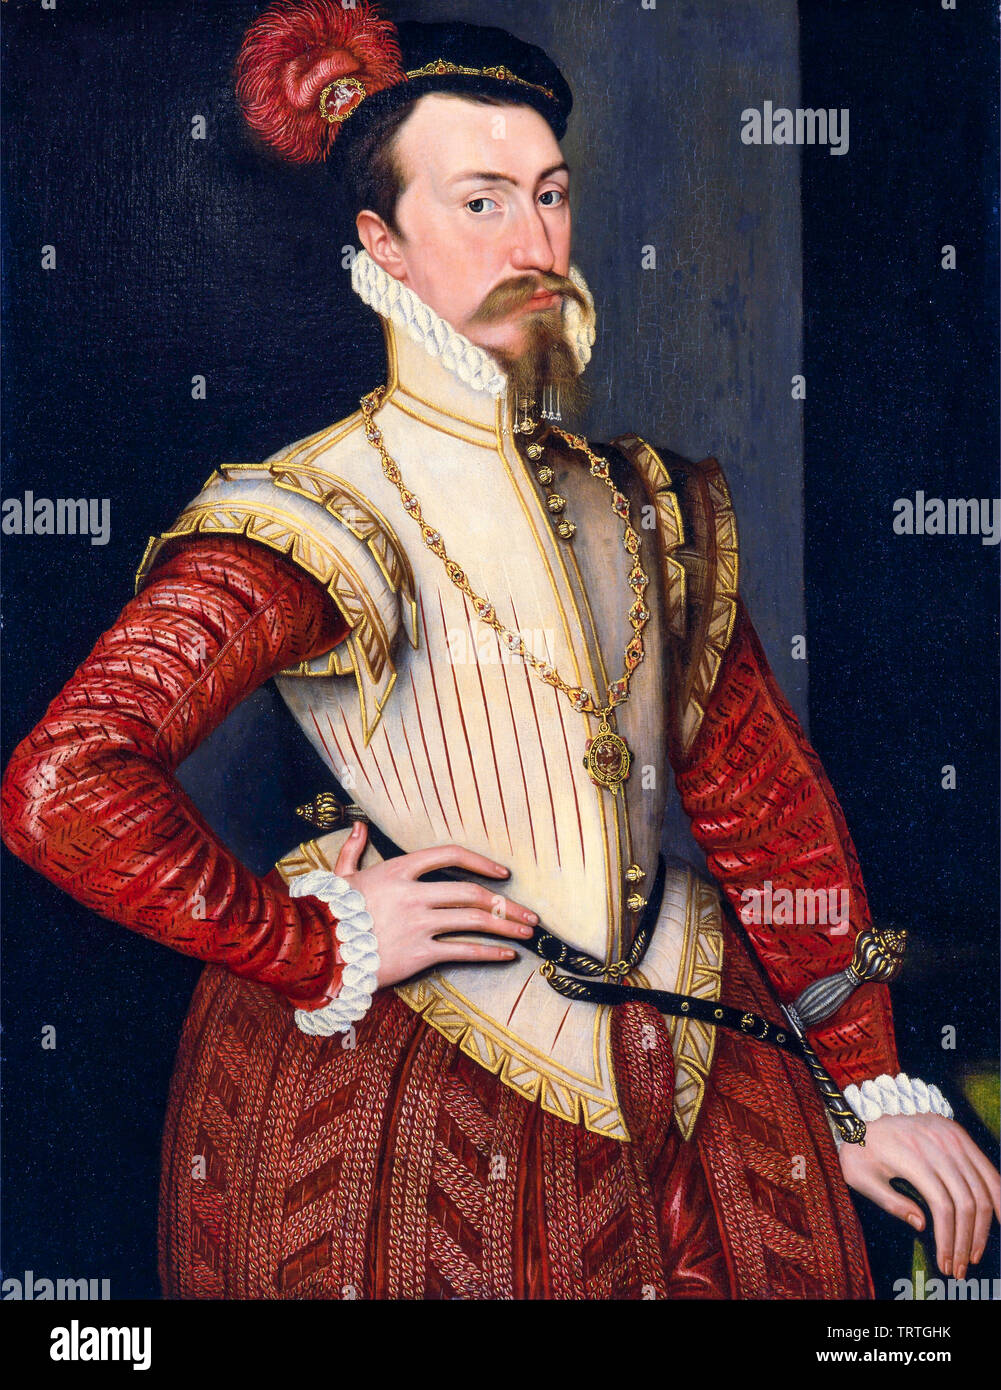 Robert Dudley, 1st Earl of Leicester, 1532-1588, portrait painting, circa 1560 Stock Photo